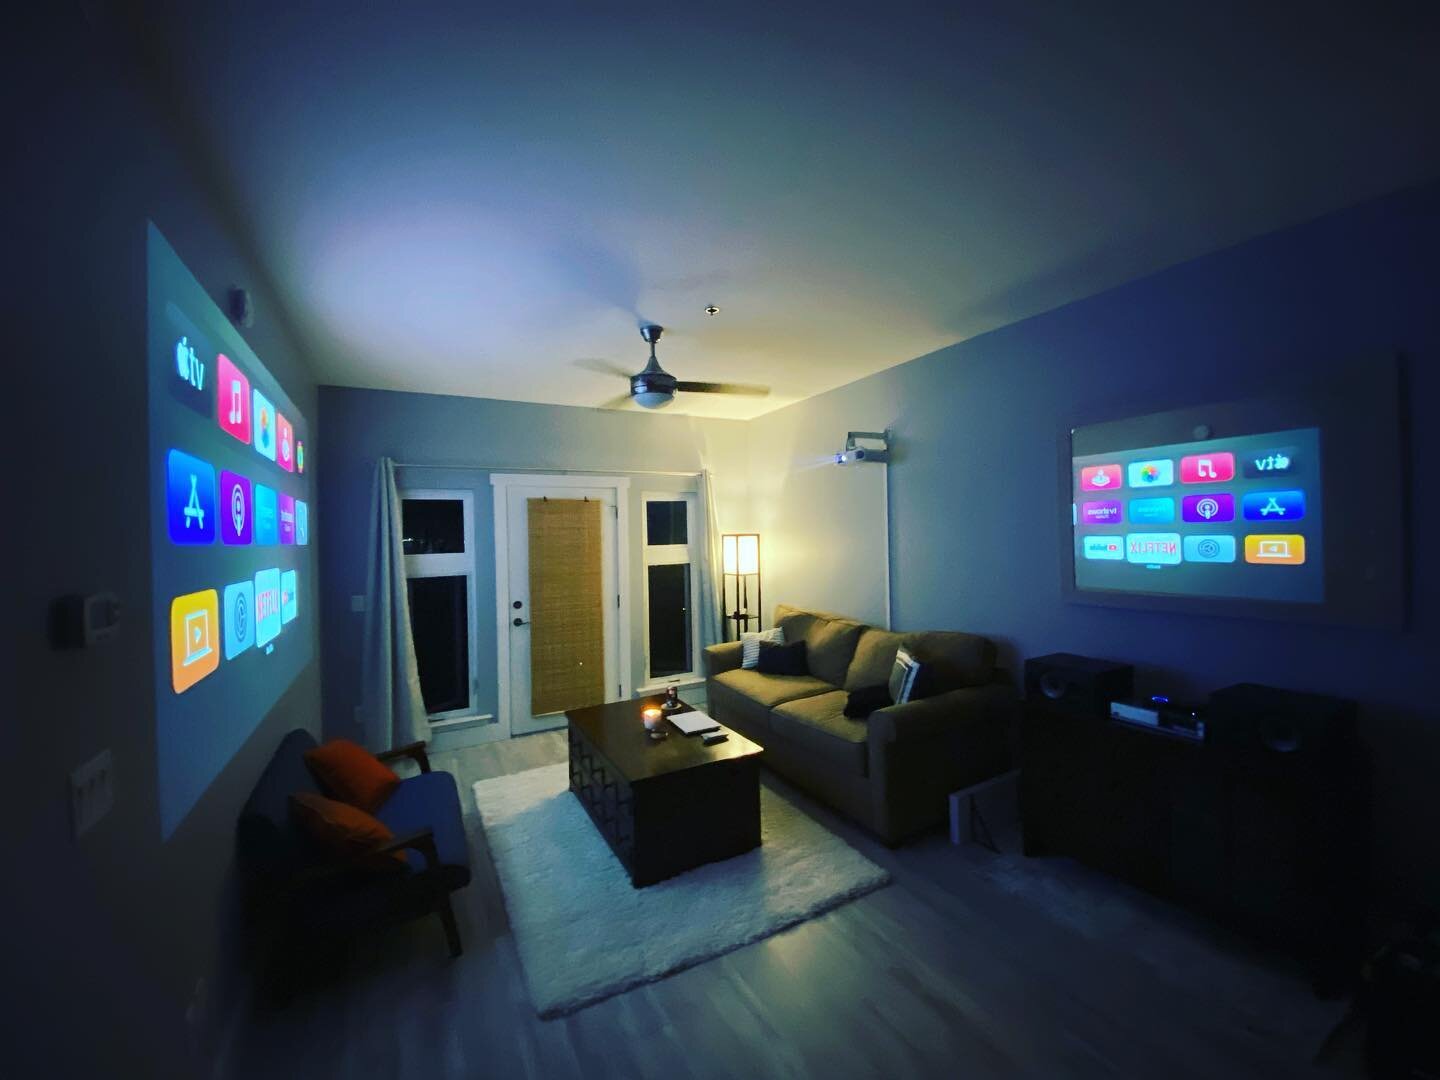 Did you that we not only provide our expert IT a services in your home but also Professional Home Theater consultations, set-ups, and installations?! We ❤️ getting all creative with your spaces! 
&mdash;&mdash;&gt; Swipe for more
#avlart #avltoday #a